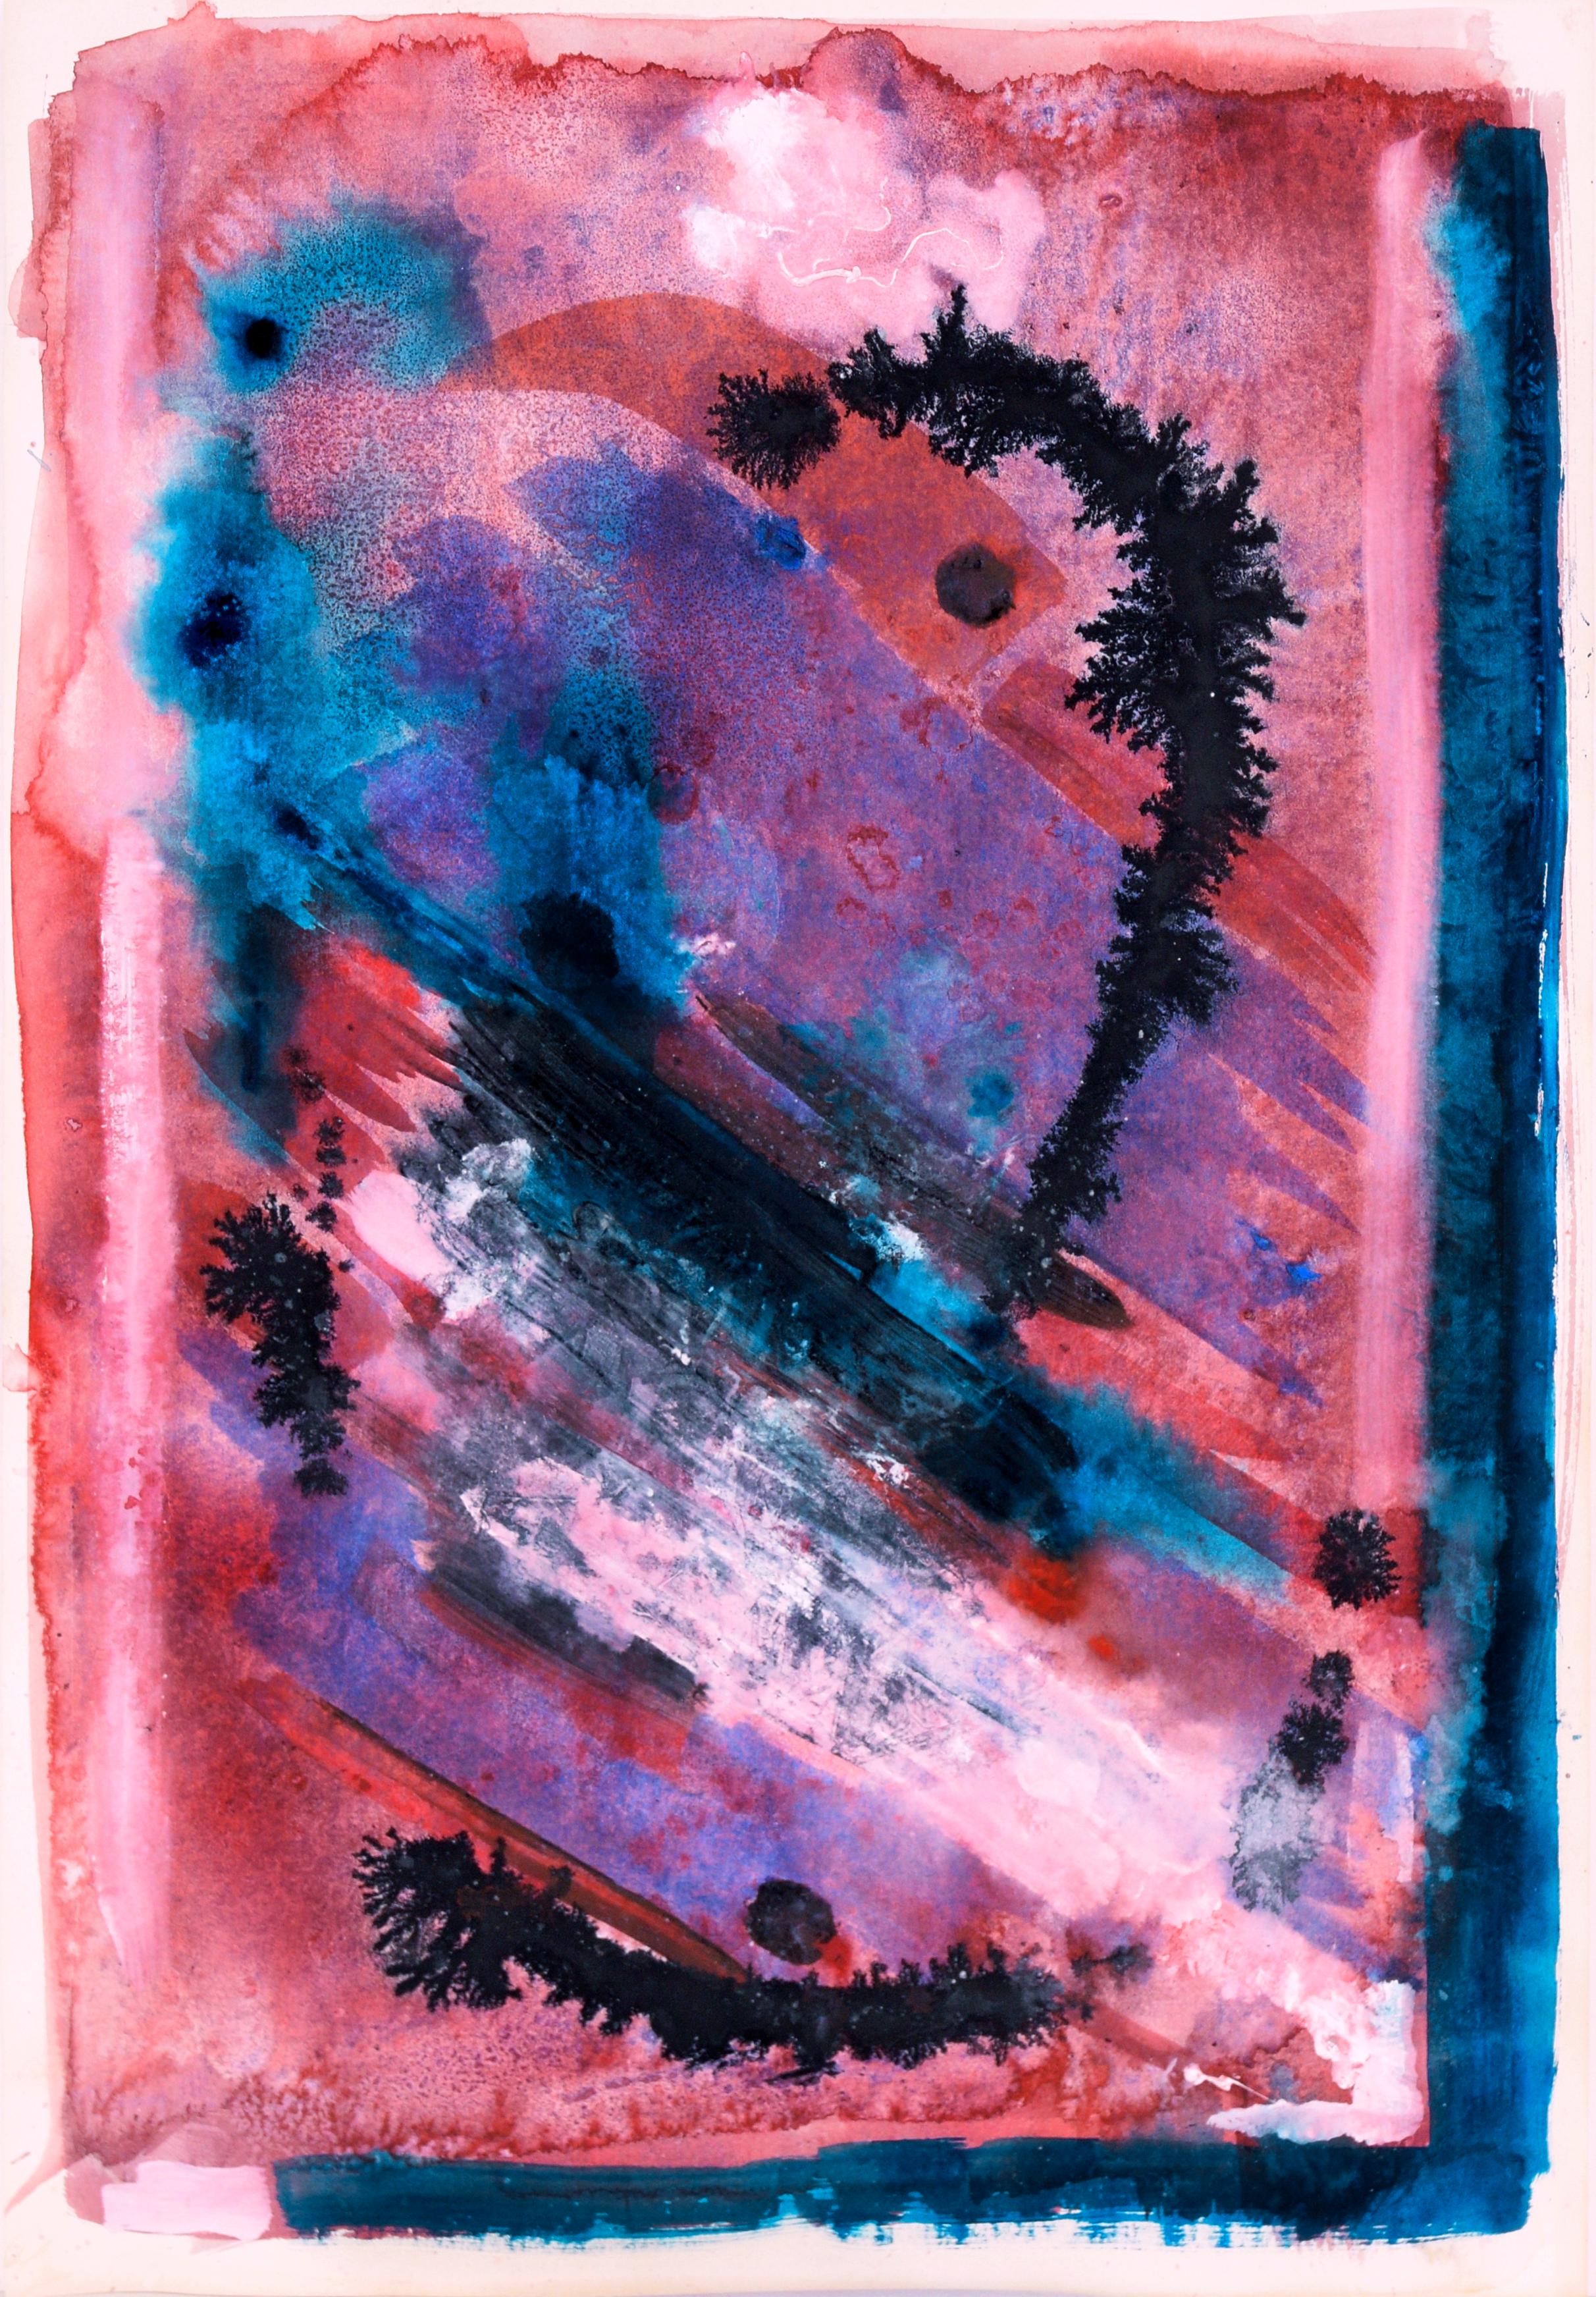 Ricardo de Silva Abstract Painting - Subaquatic Canyon - Abstract Expressionist on Paper